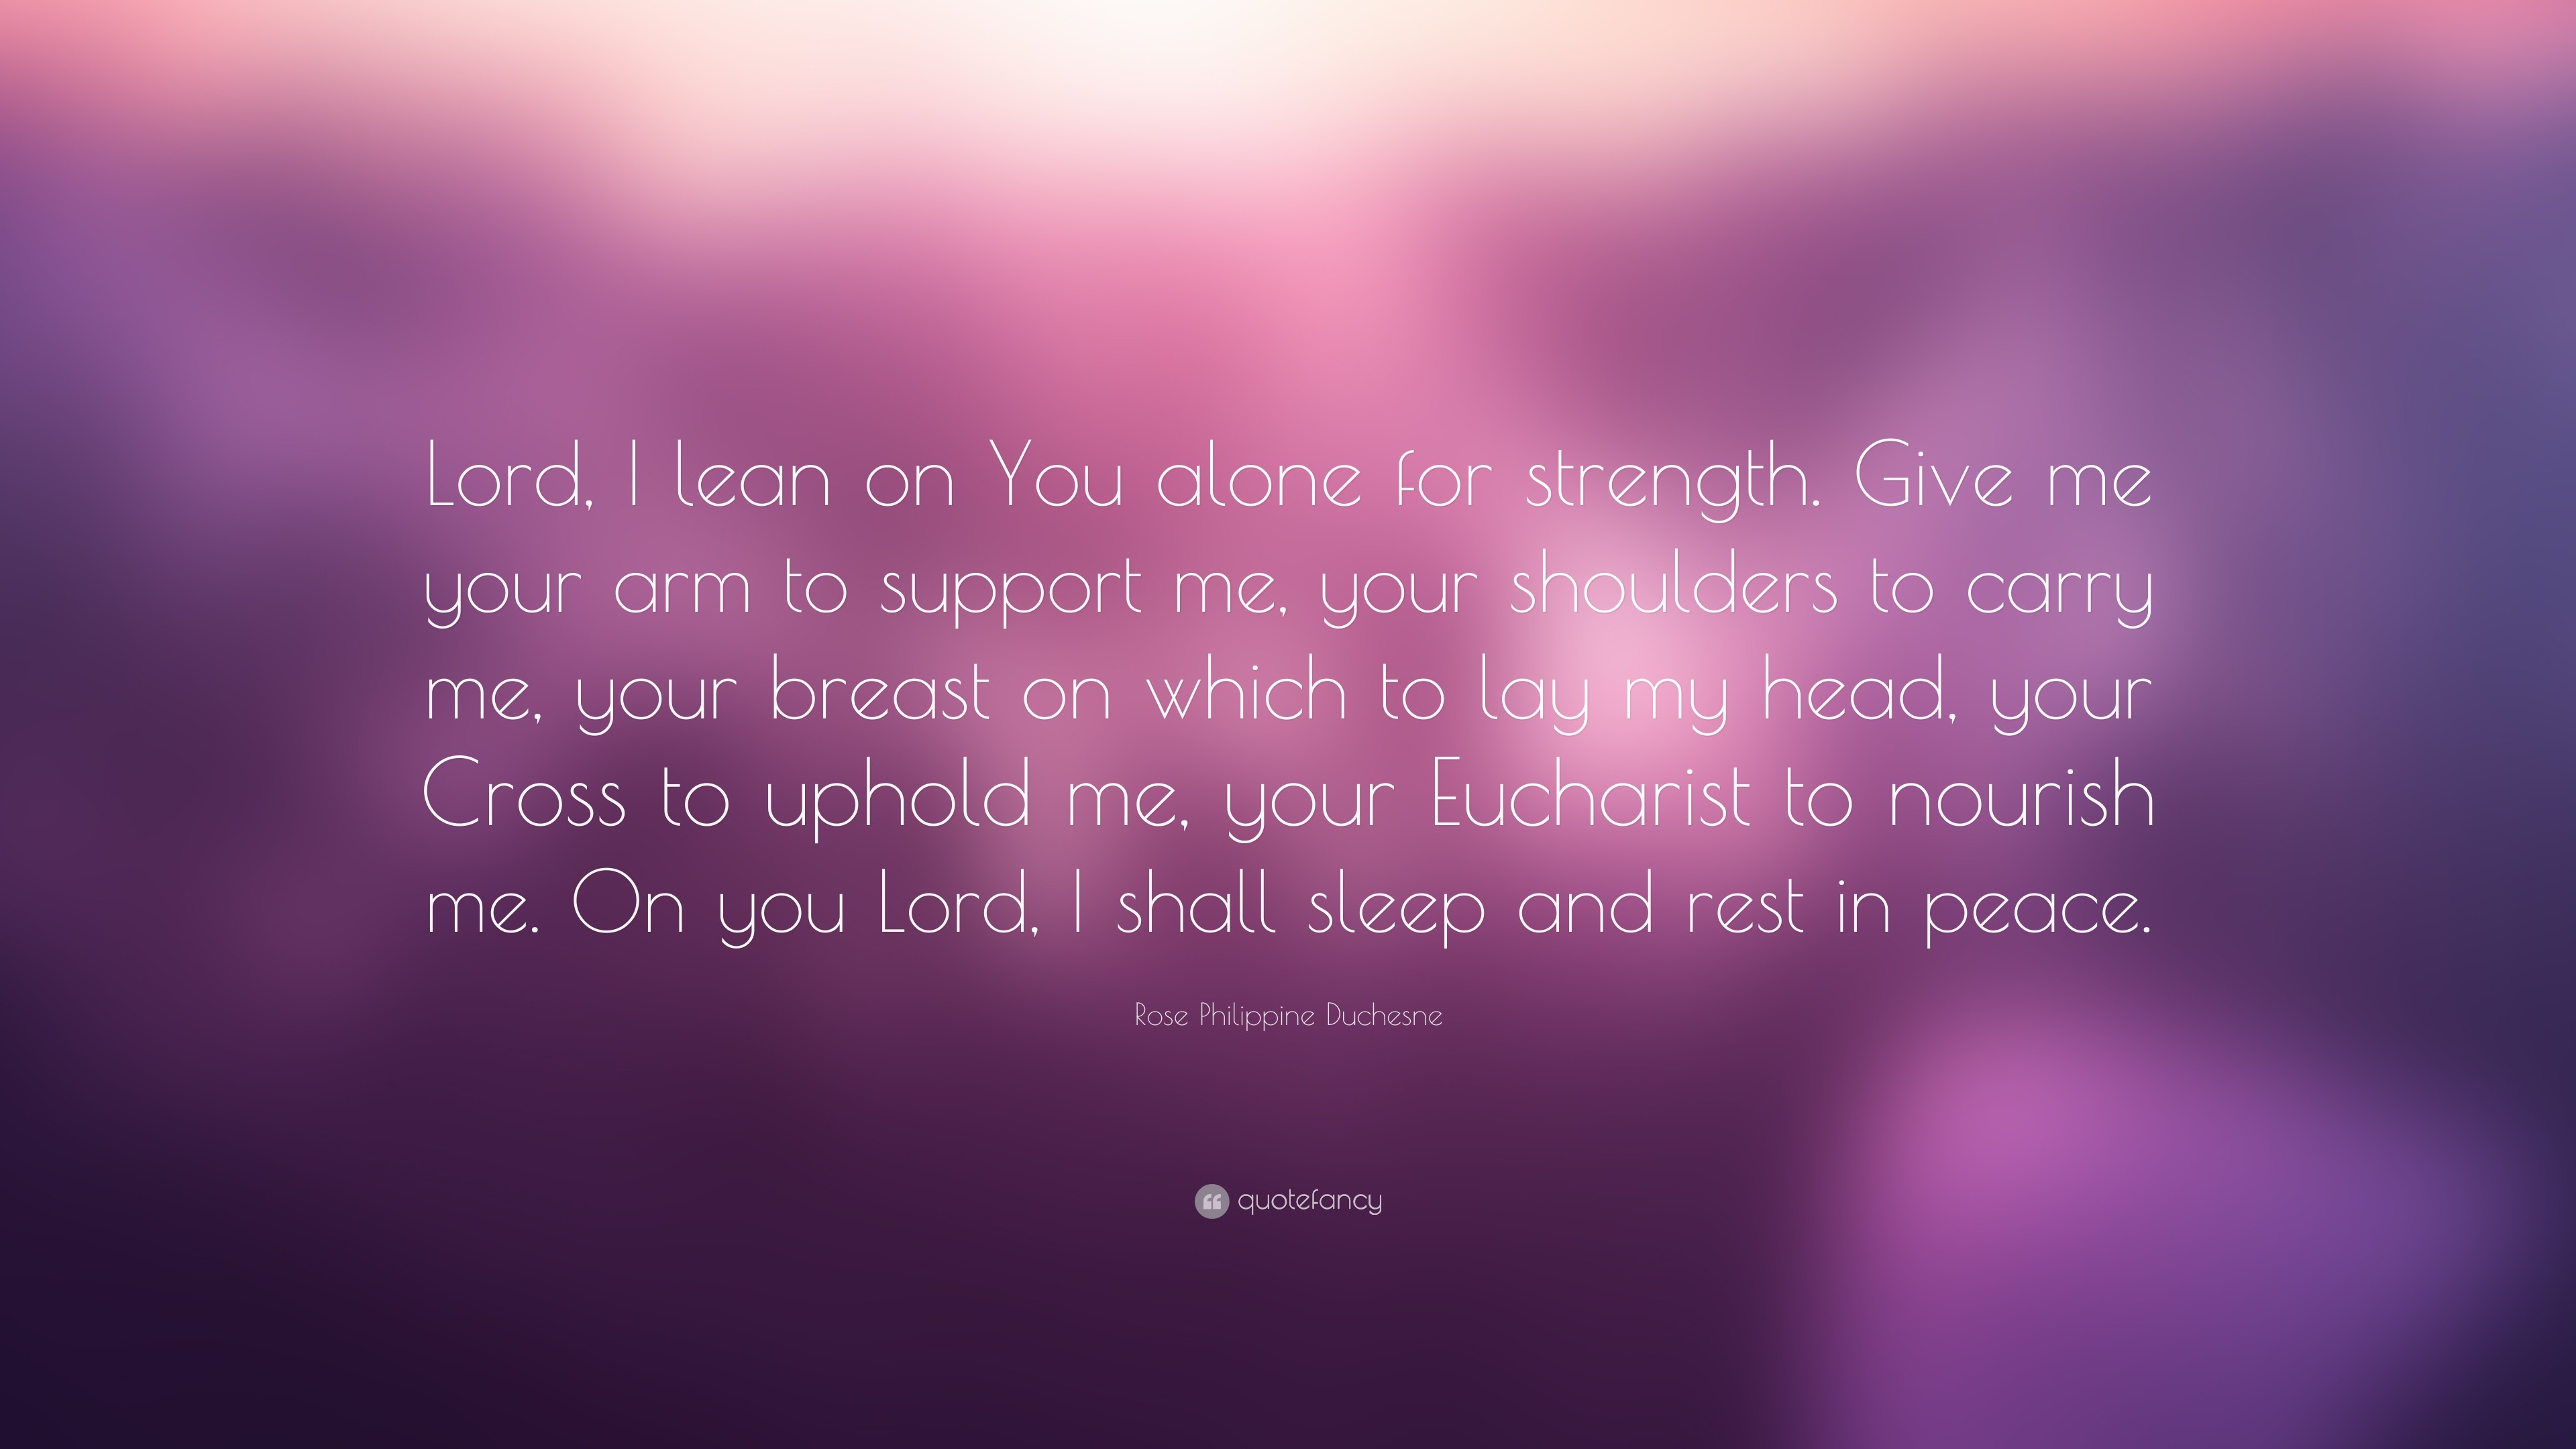 3840x2160 Rose Philippine Duchesne Quote: “Lord, I lean on You alone for strength.